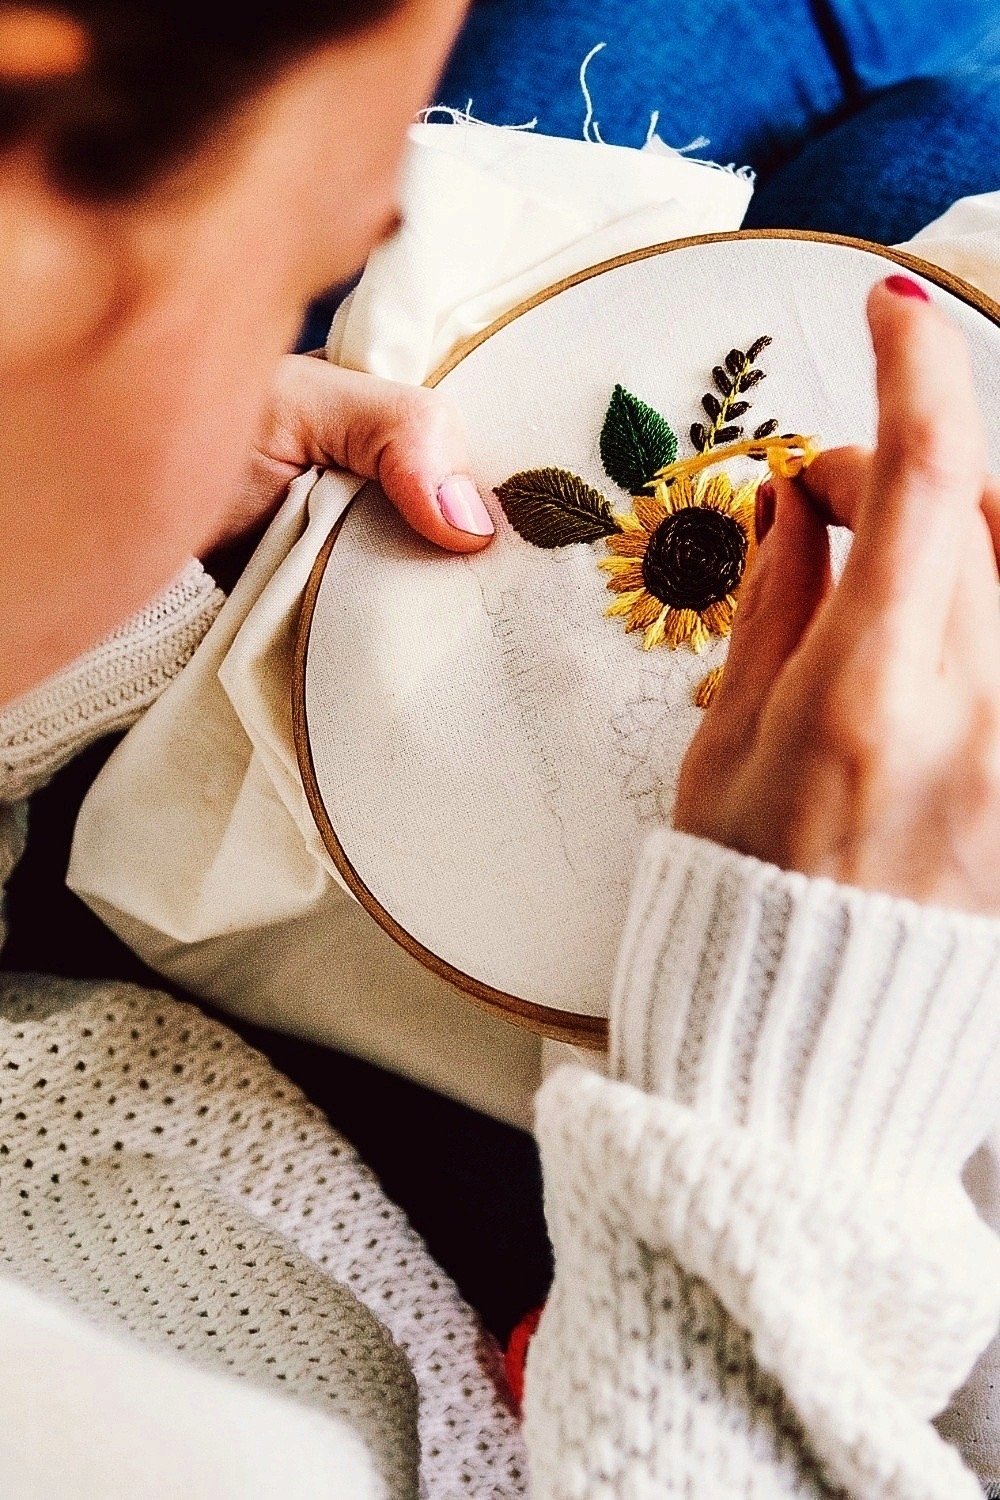 The Best 8 Simple Cozy Self-Care Staycation Ideas at Home_Embroidery